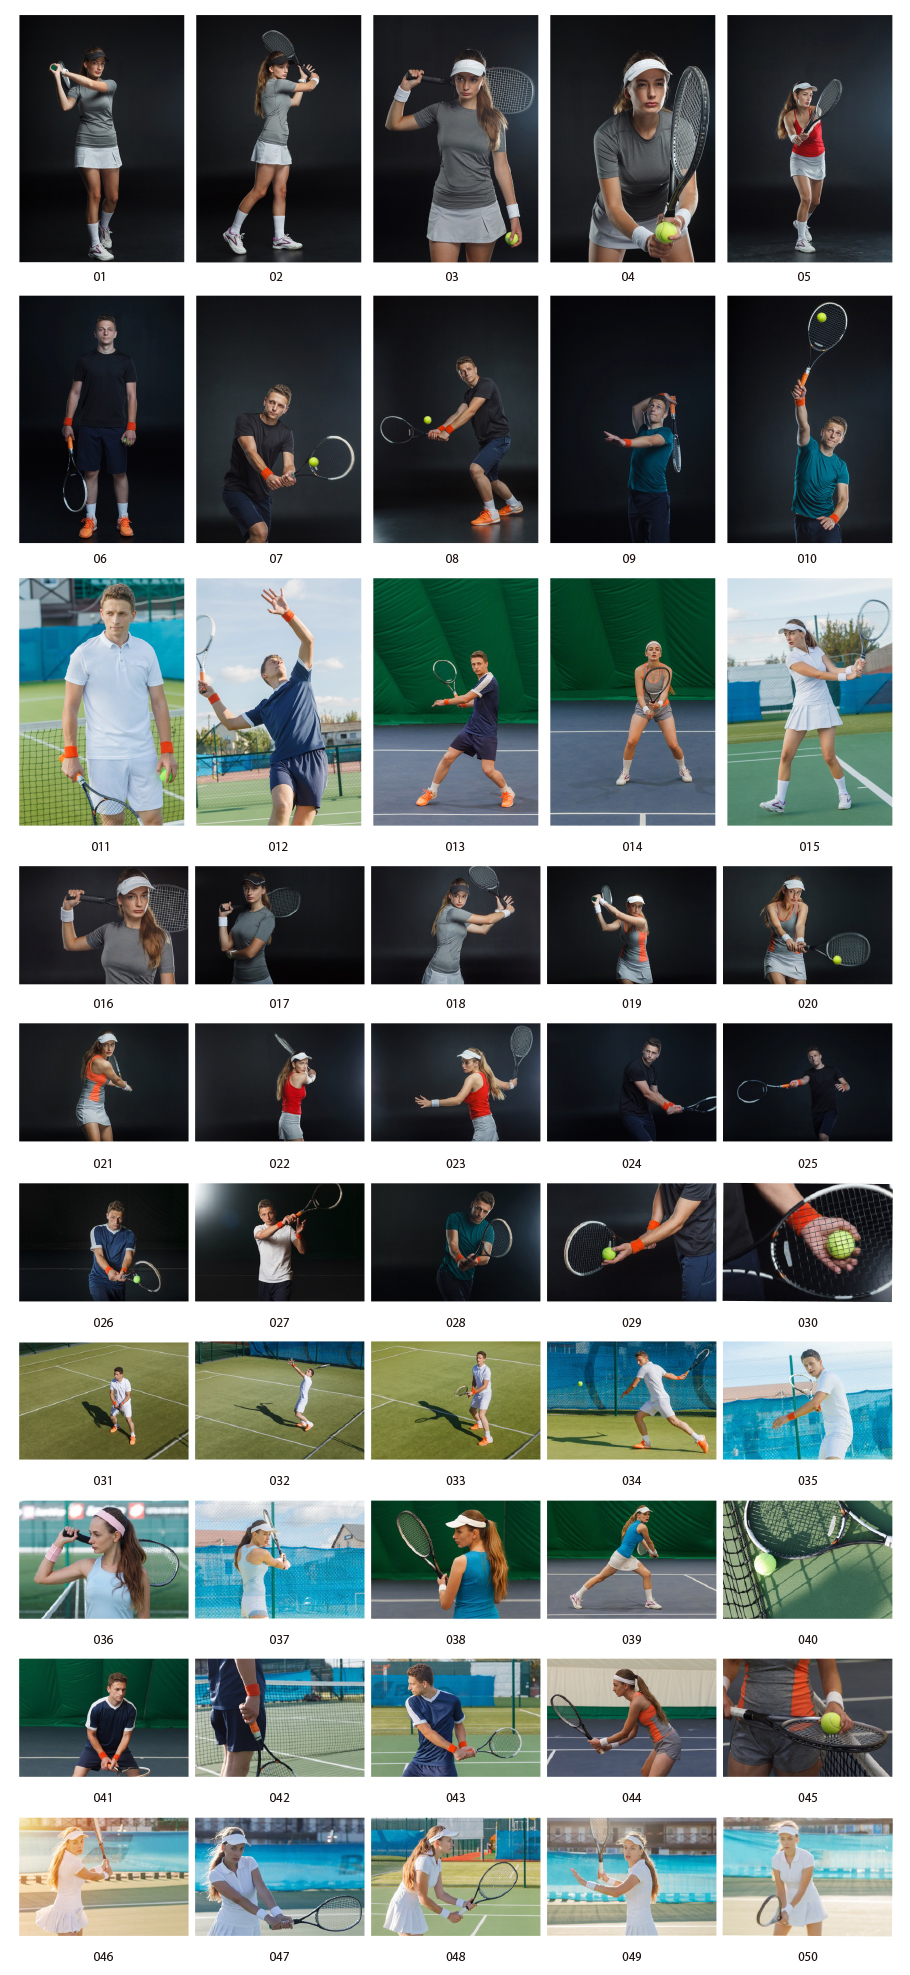 Pro tennis picture material